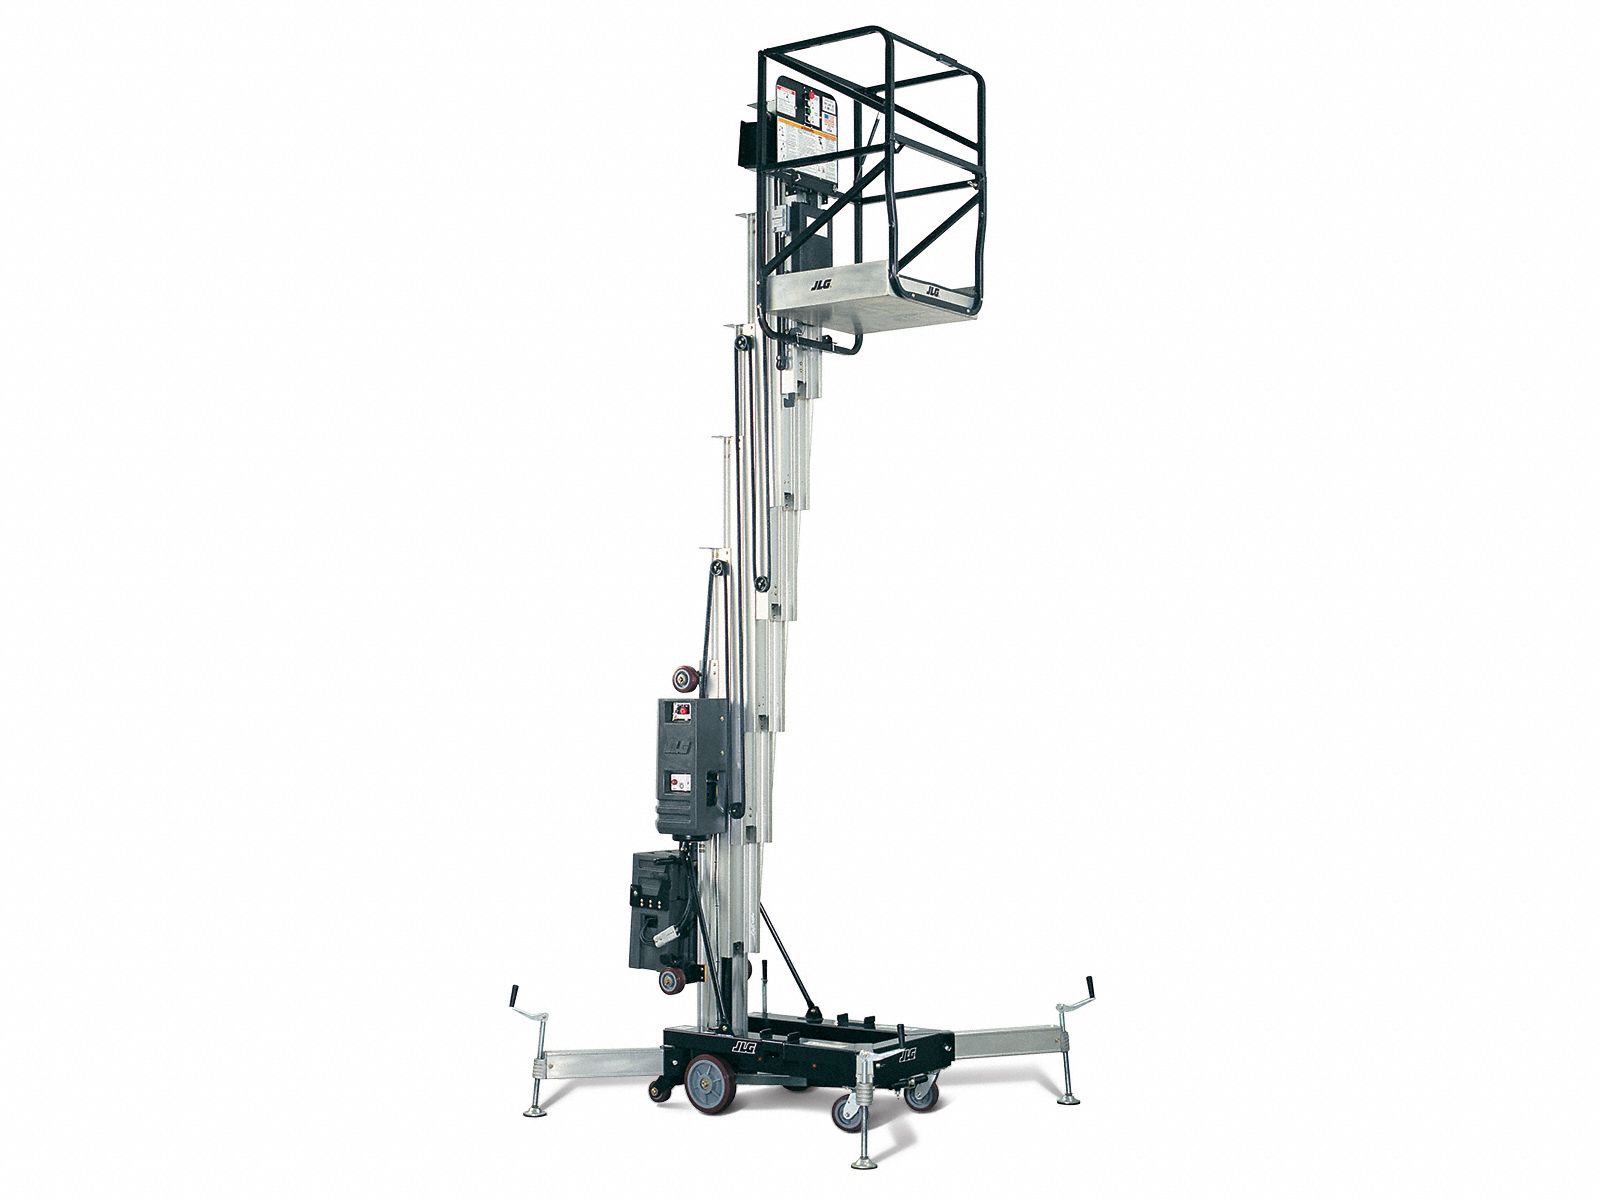 Personnel Lift: Push-Around, 12 VDC Battery, 300 lb Load Capacity, 44 ft Max. Work Ht